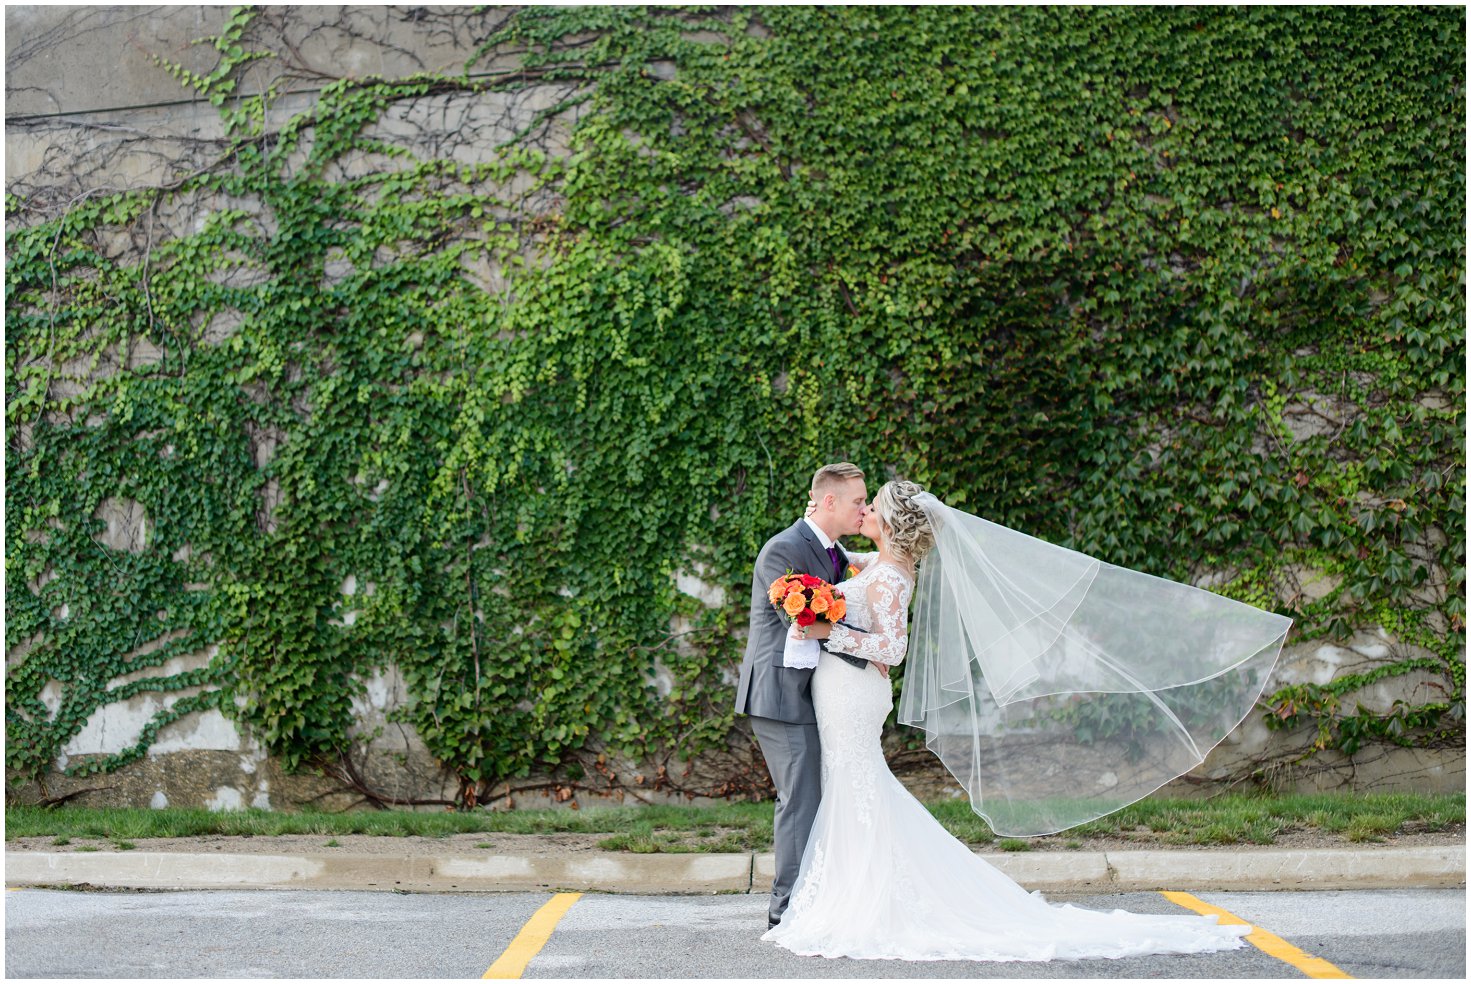 Des Moines Wedding Photographer capturing images in the iconic des moines area